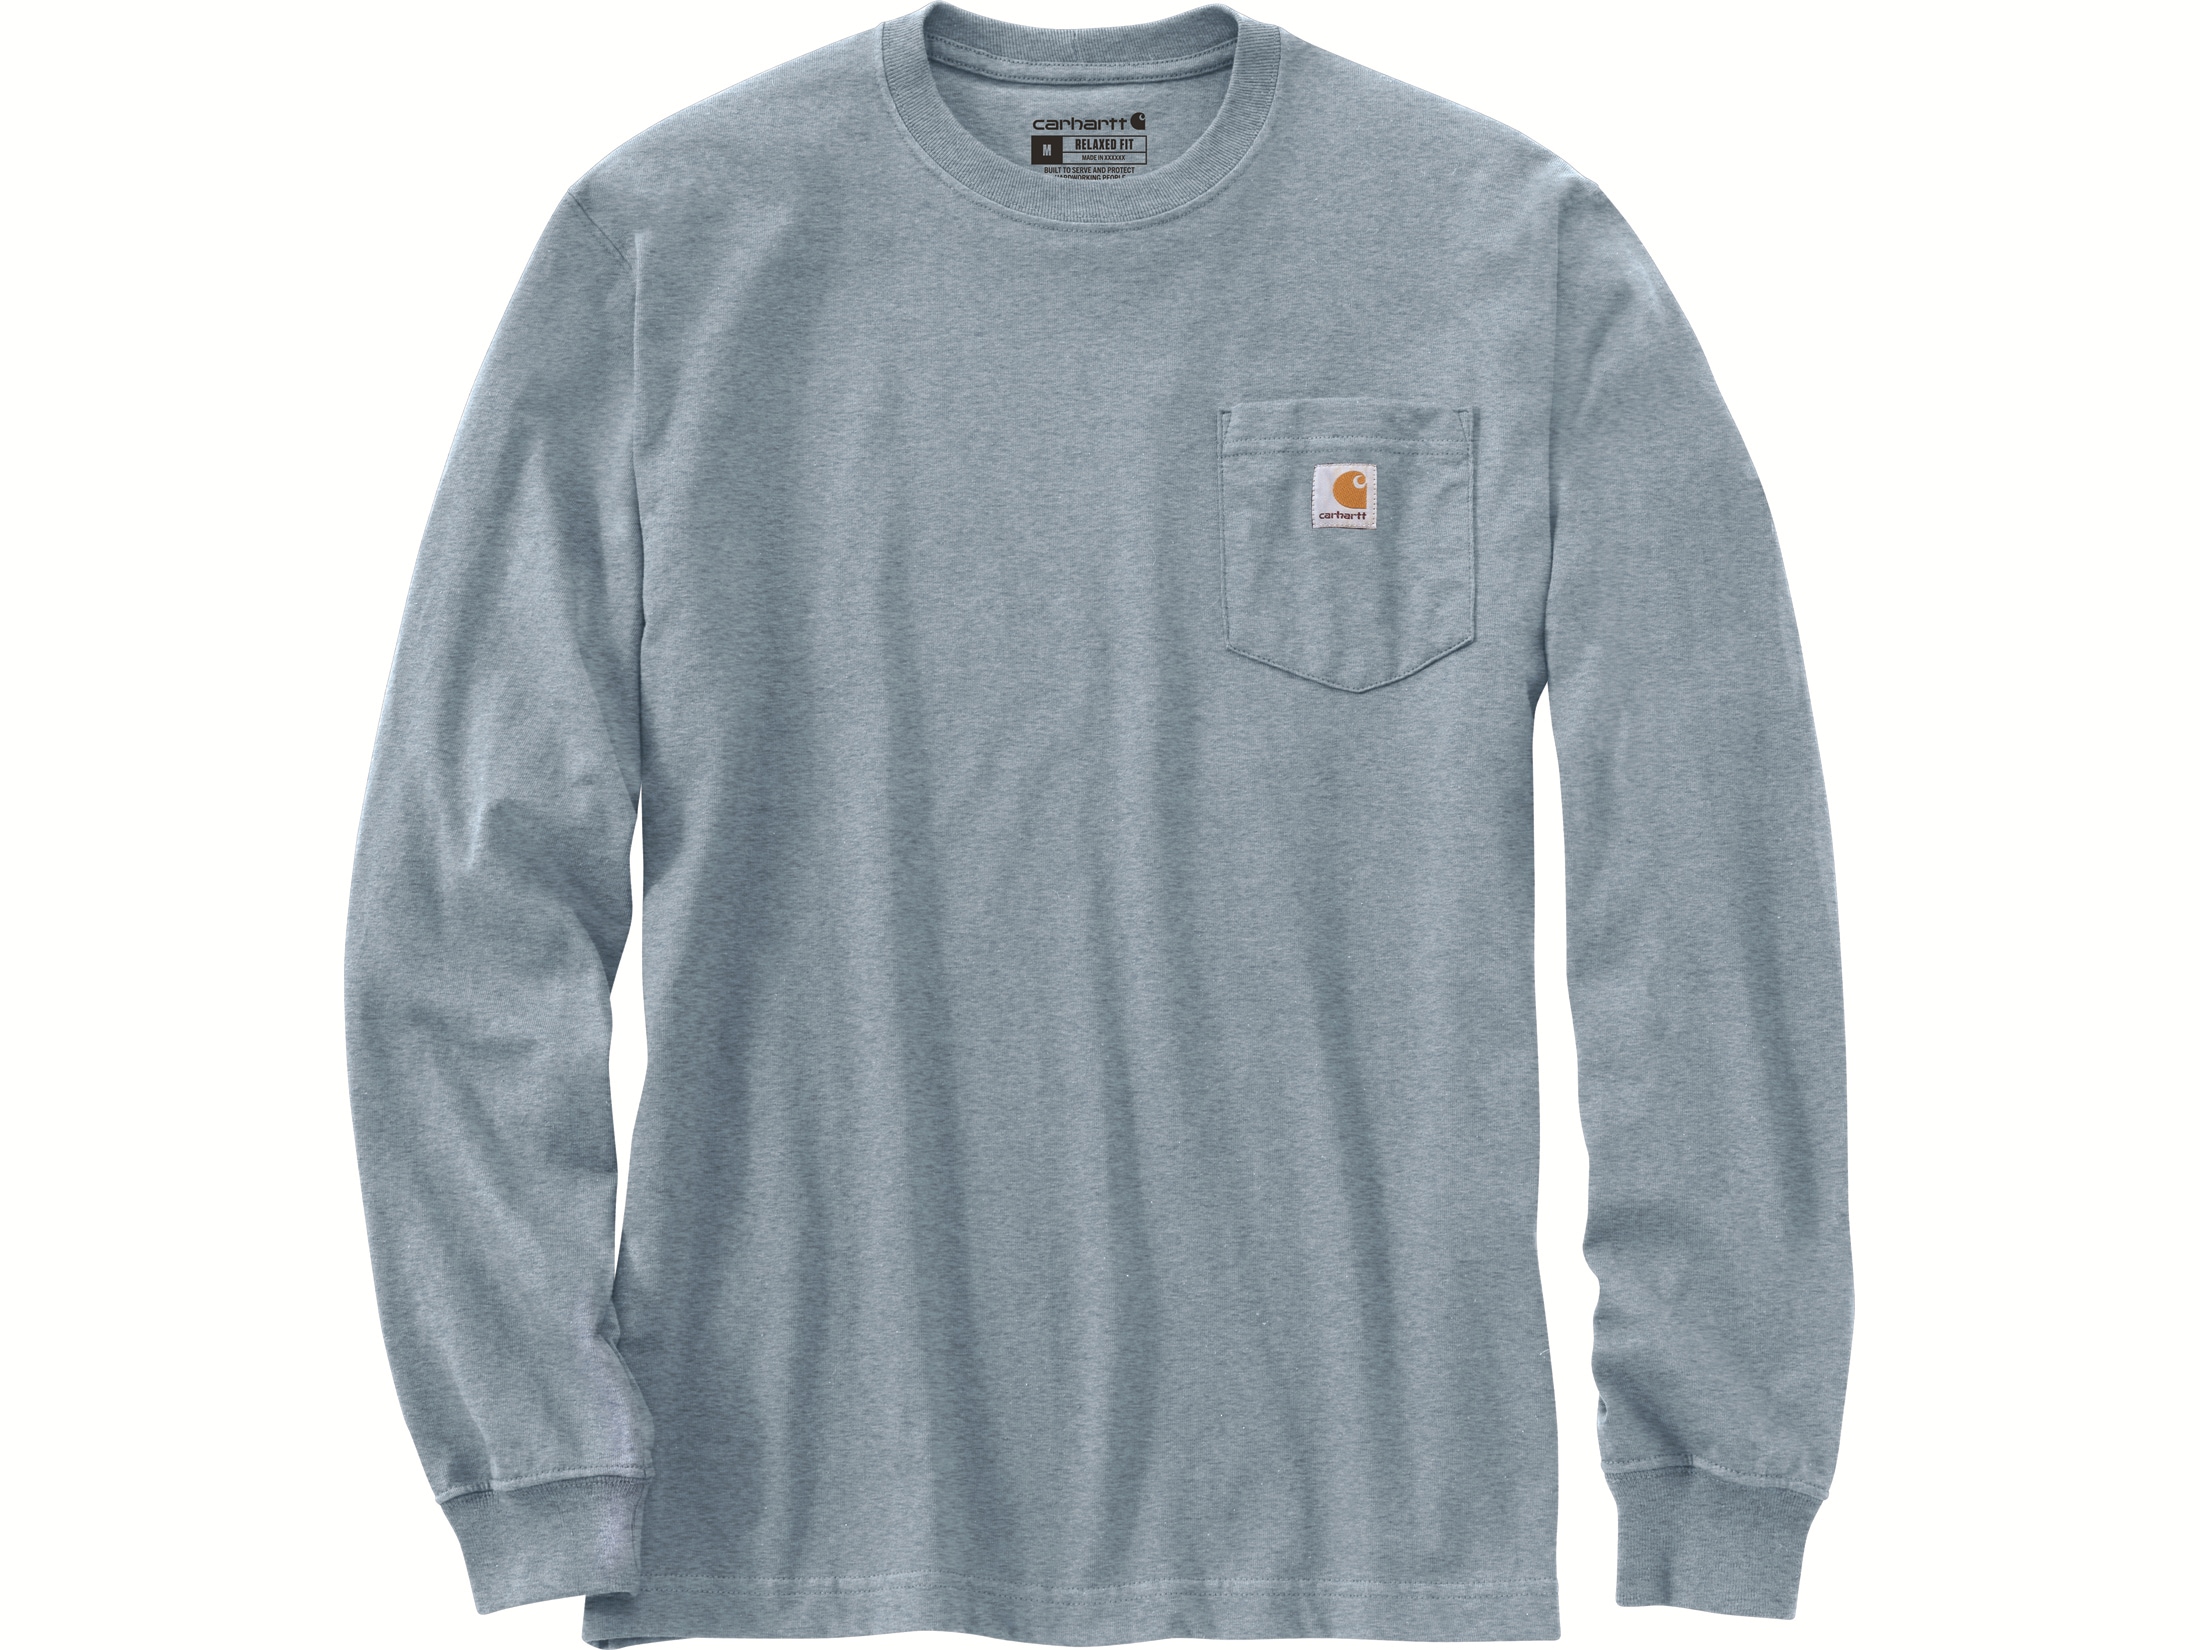 Carhartt Men's Relaxed Fit Heavyweight Long Sleeve Pocket Crafted